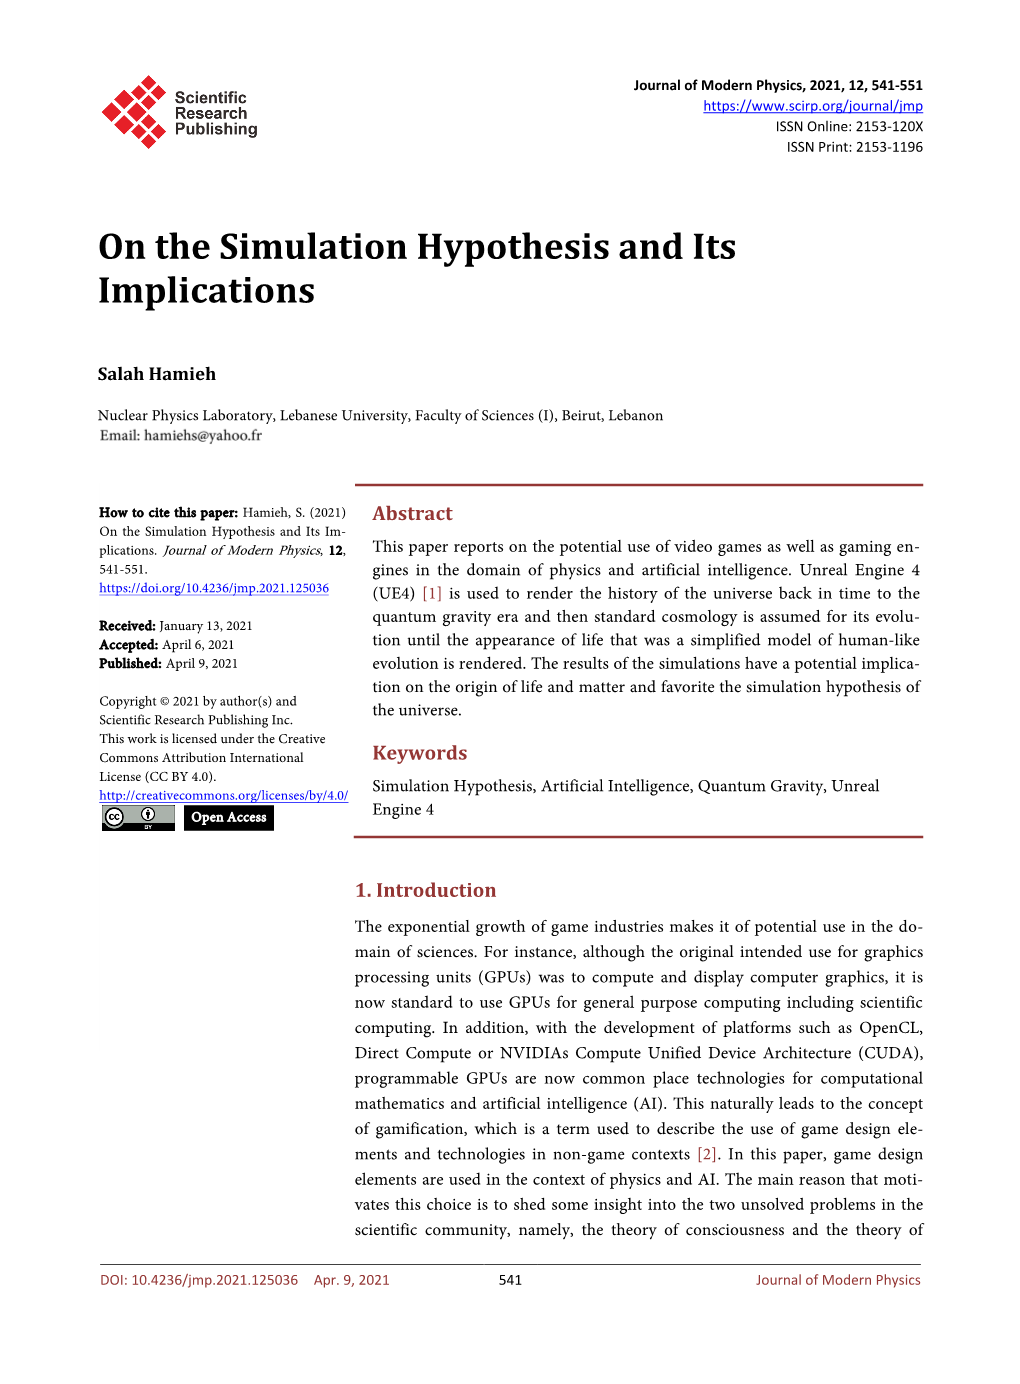 On the Simulation Hypothesis and Its Implications